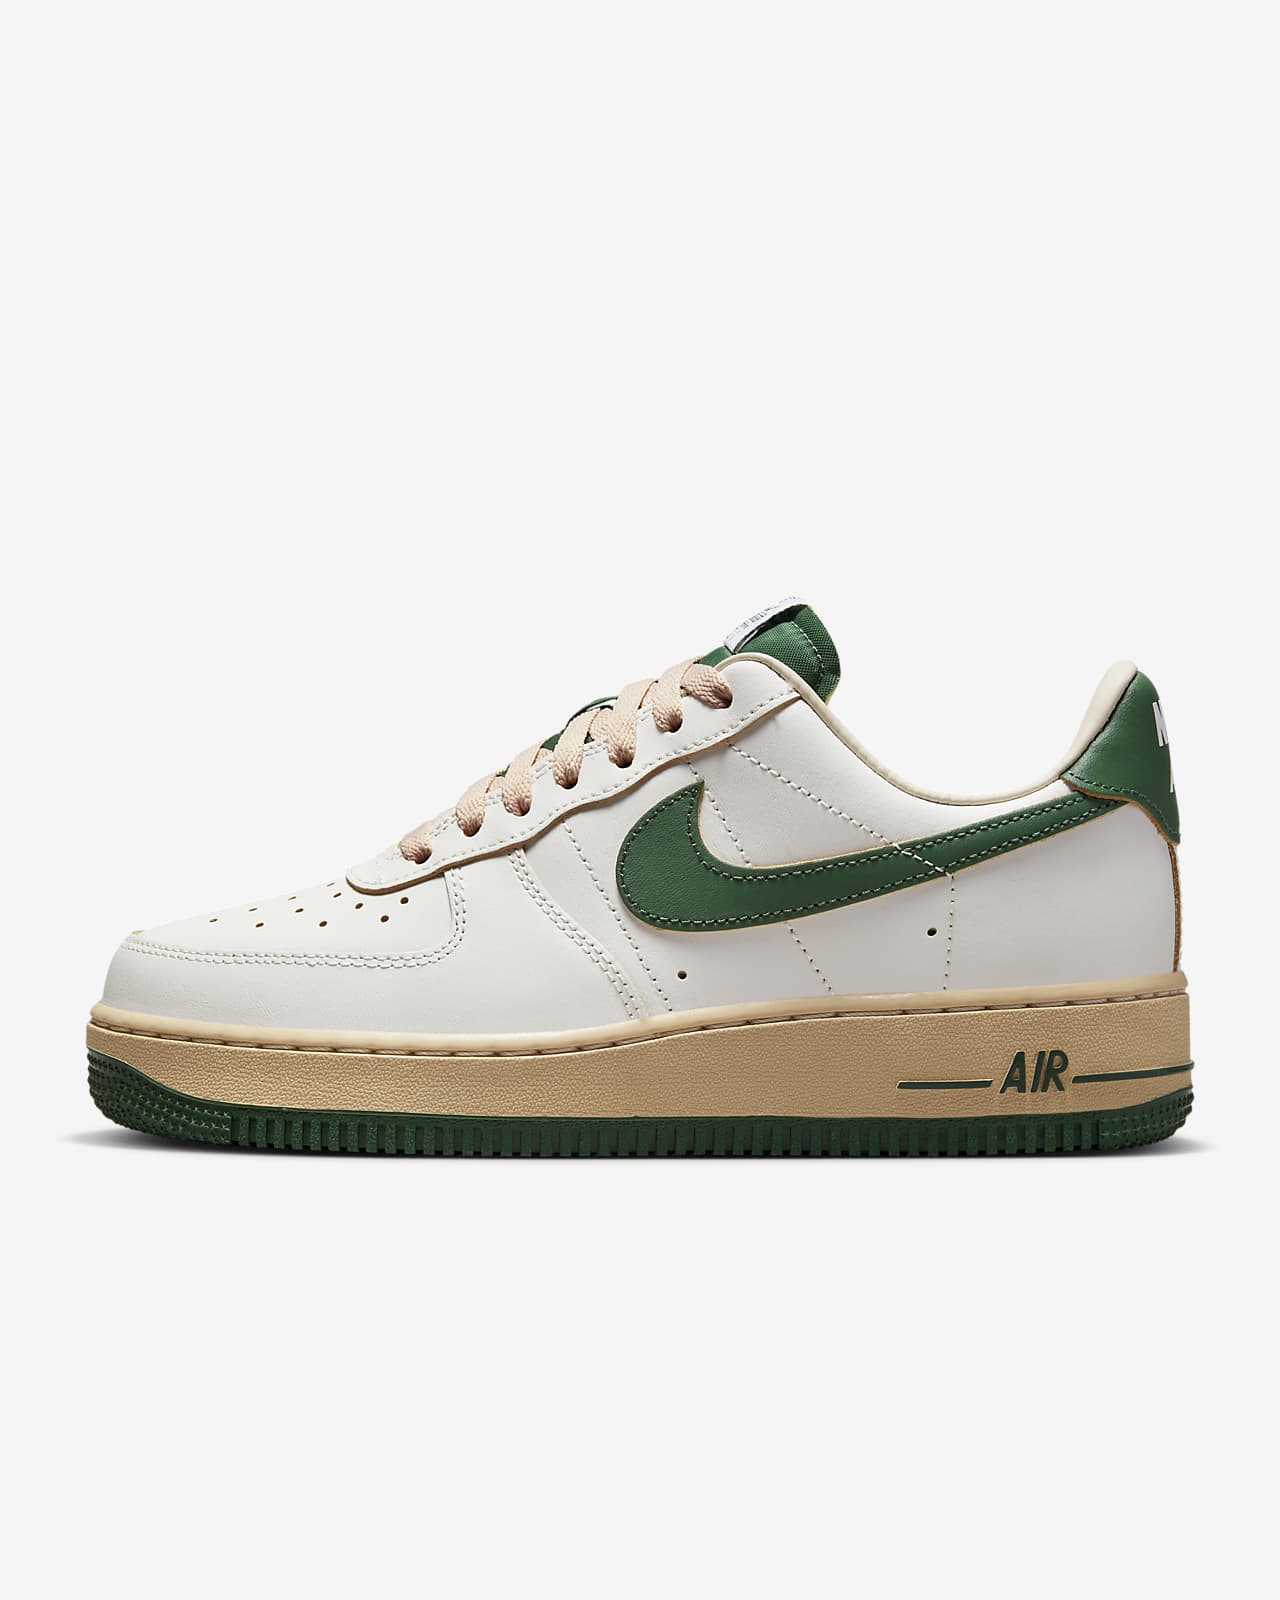 Nike Kids Air Force 1 LV8 Shoes, 7